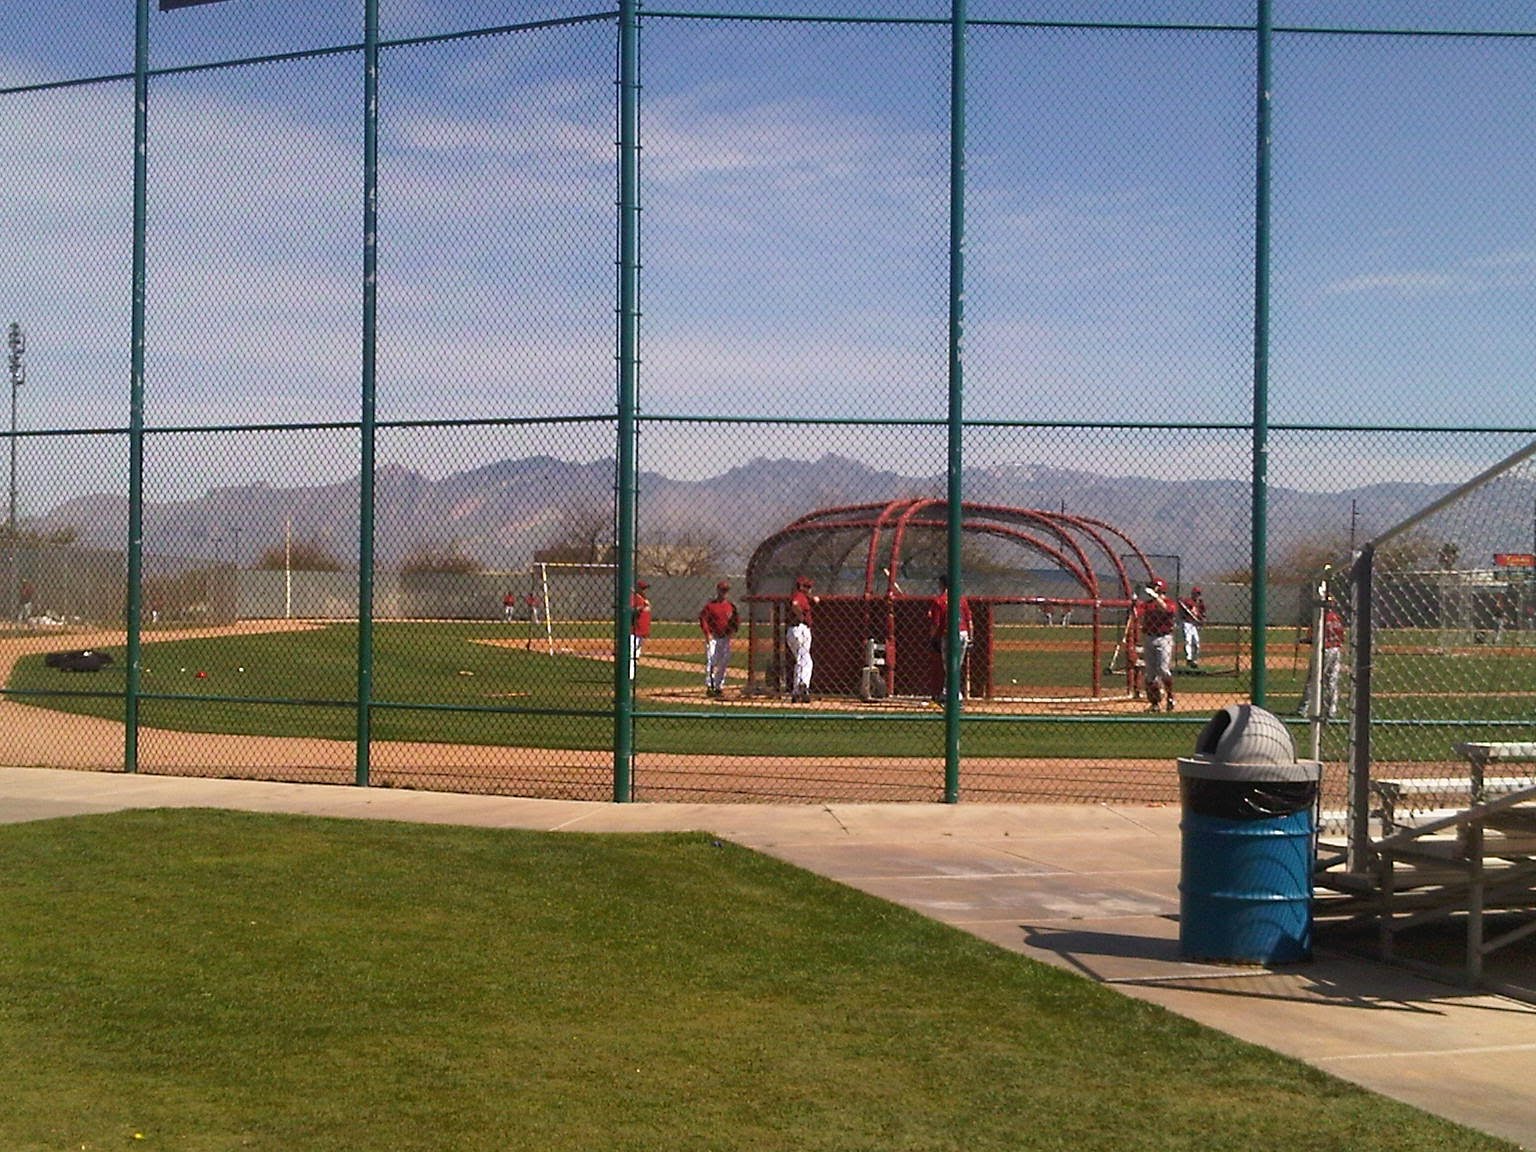 [Minor+League+BP+with+mountains.JPG]